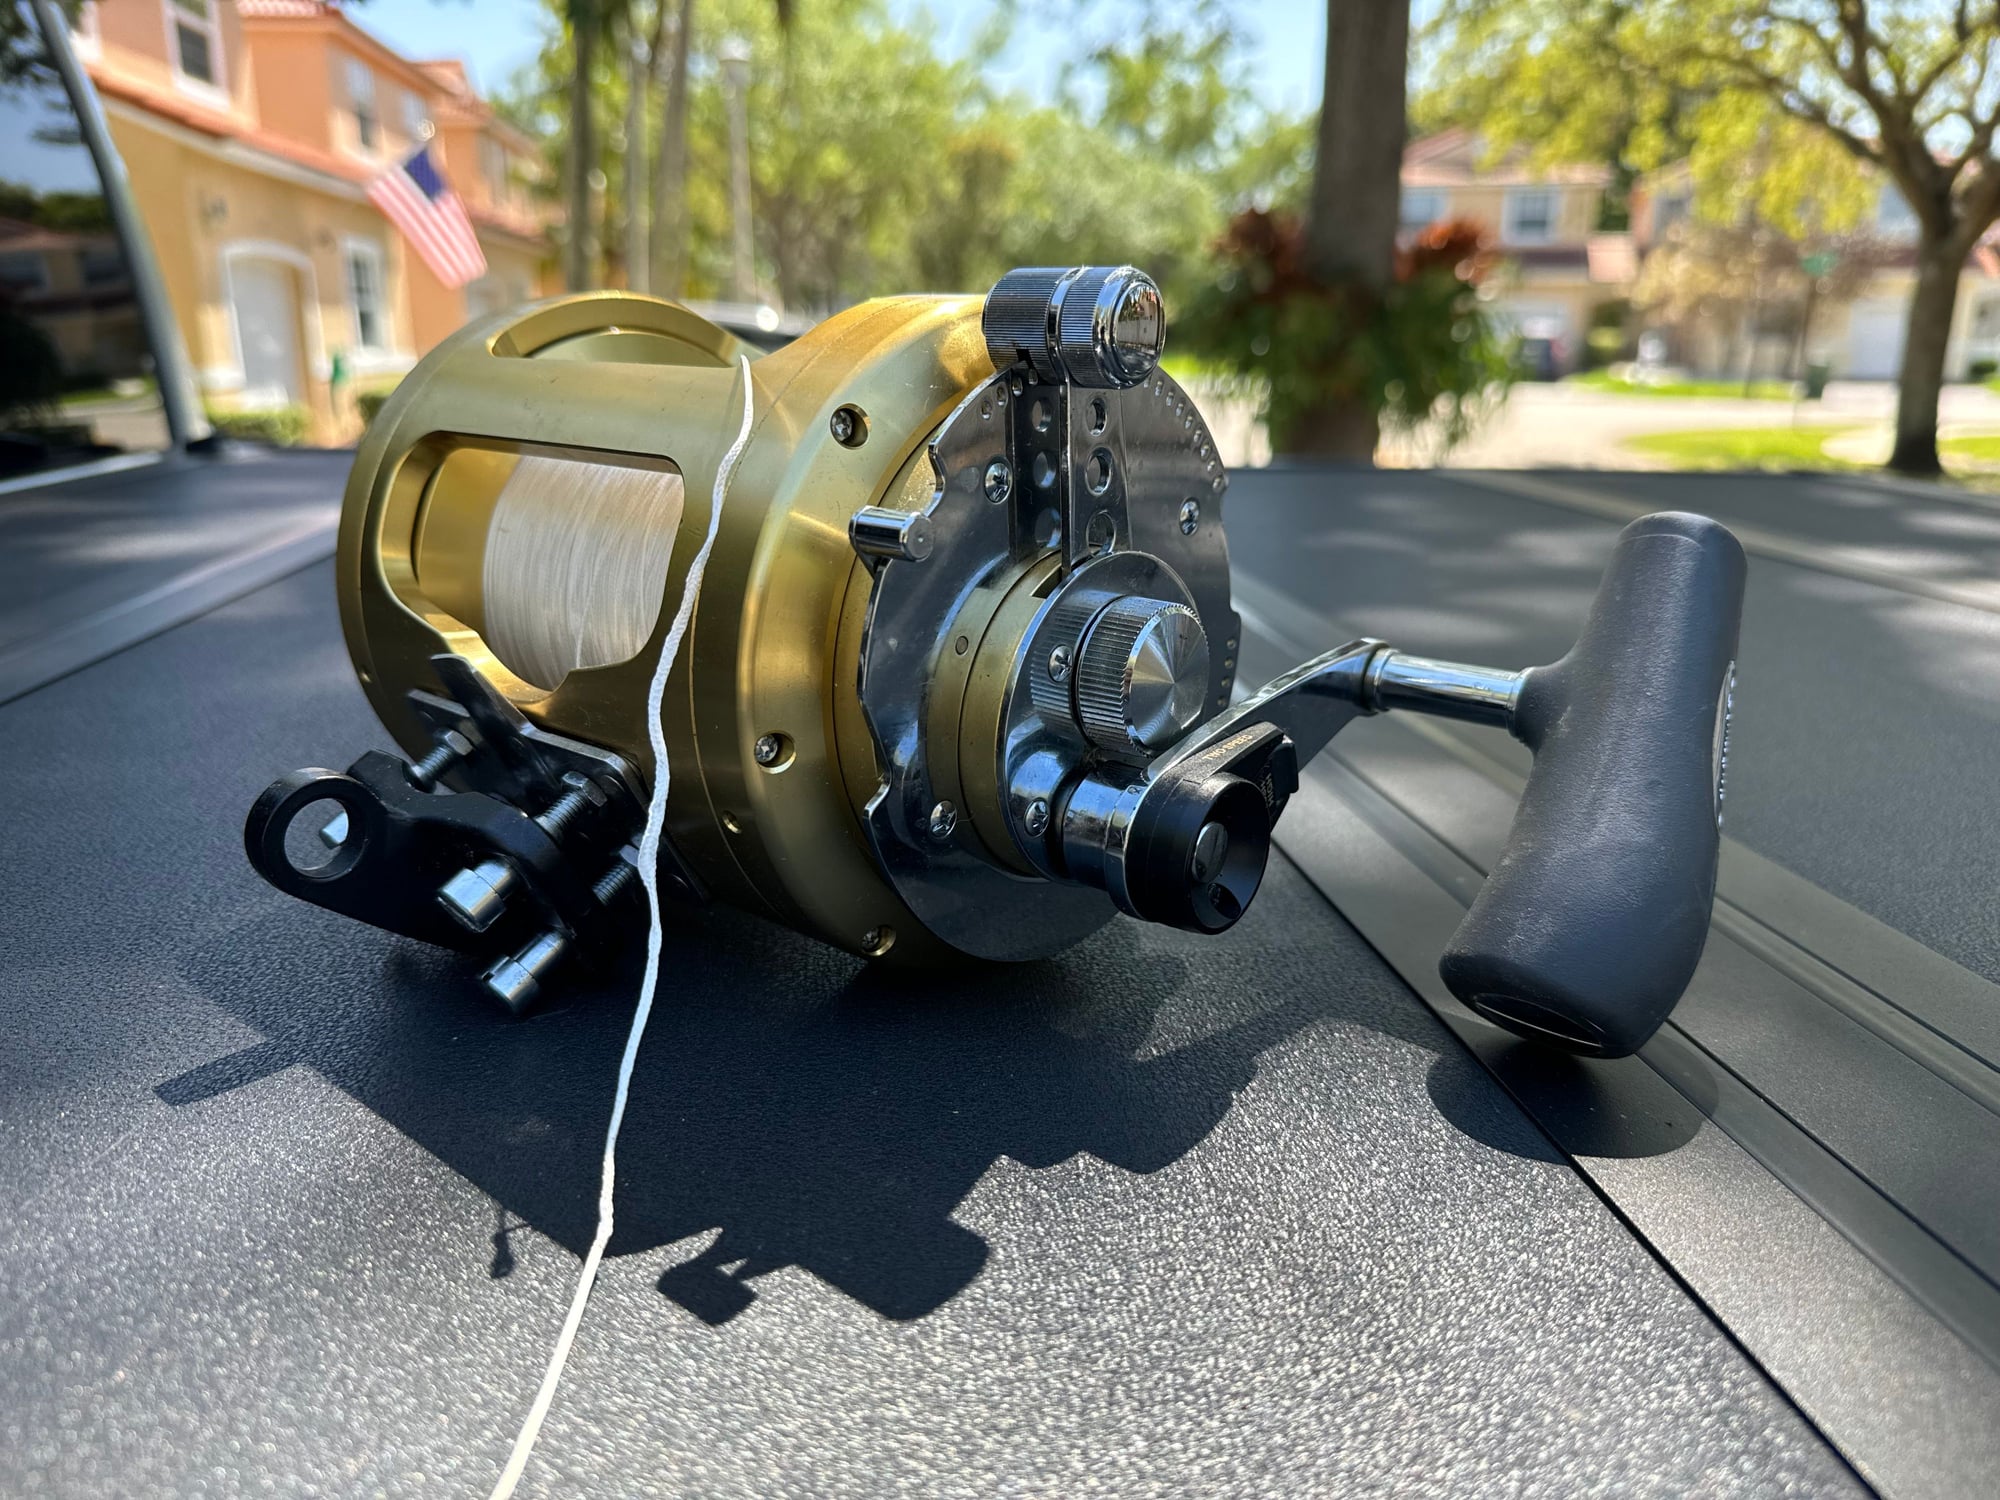 Shimano Tiagra 80. Barely used - The Hull Truth - Boating and Fishing Forum